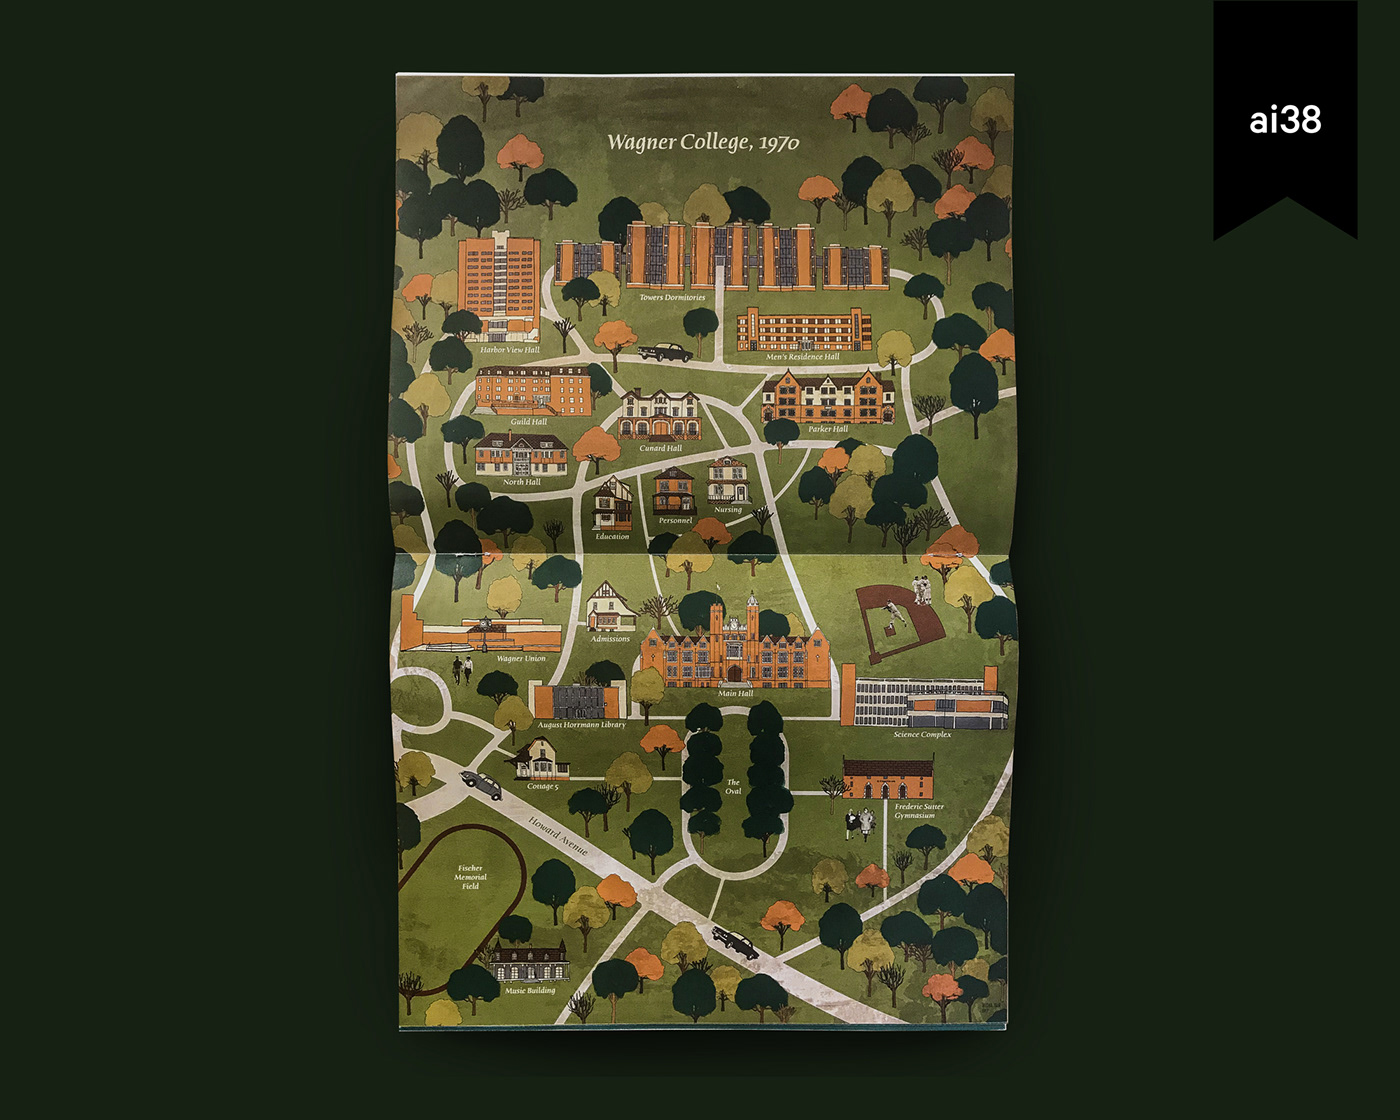 Wagner College Wagner Magazine Brooklyn Woof Party Editorial Illustration publication old building Building Outline Architecture facade college map vintage map American Illustration 38 aiap small town map college town map map guide flat facade